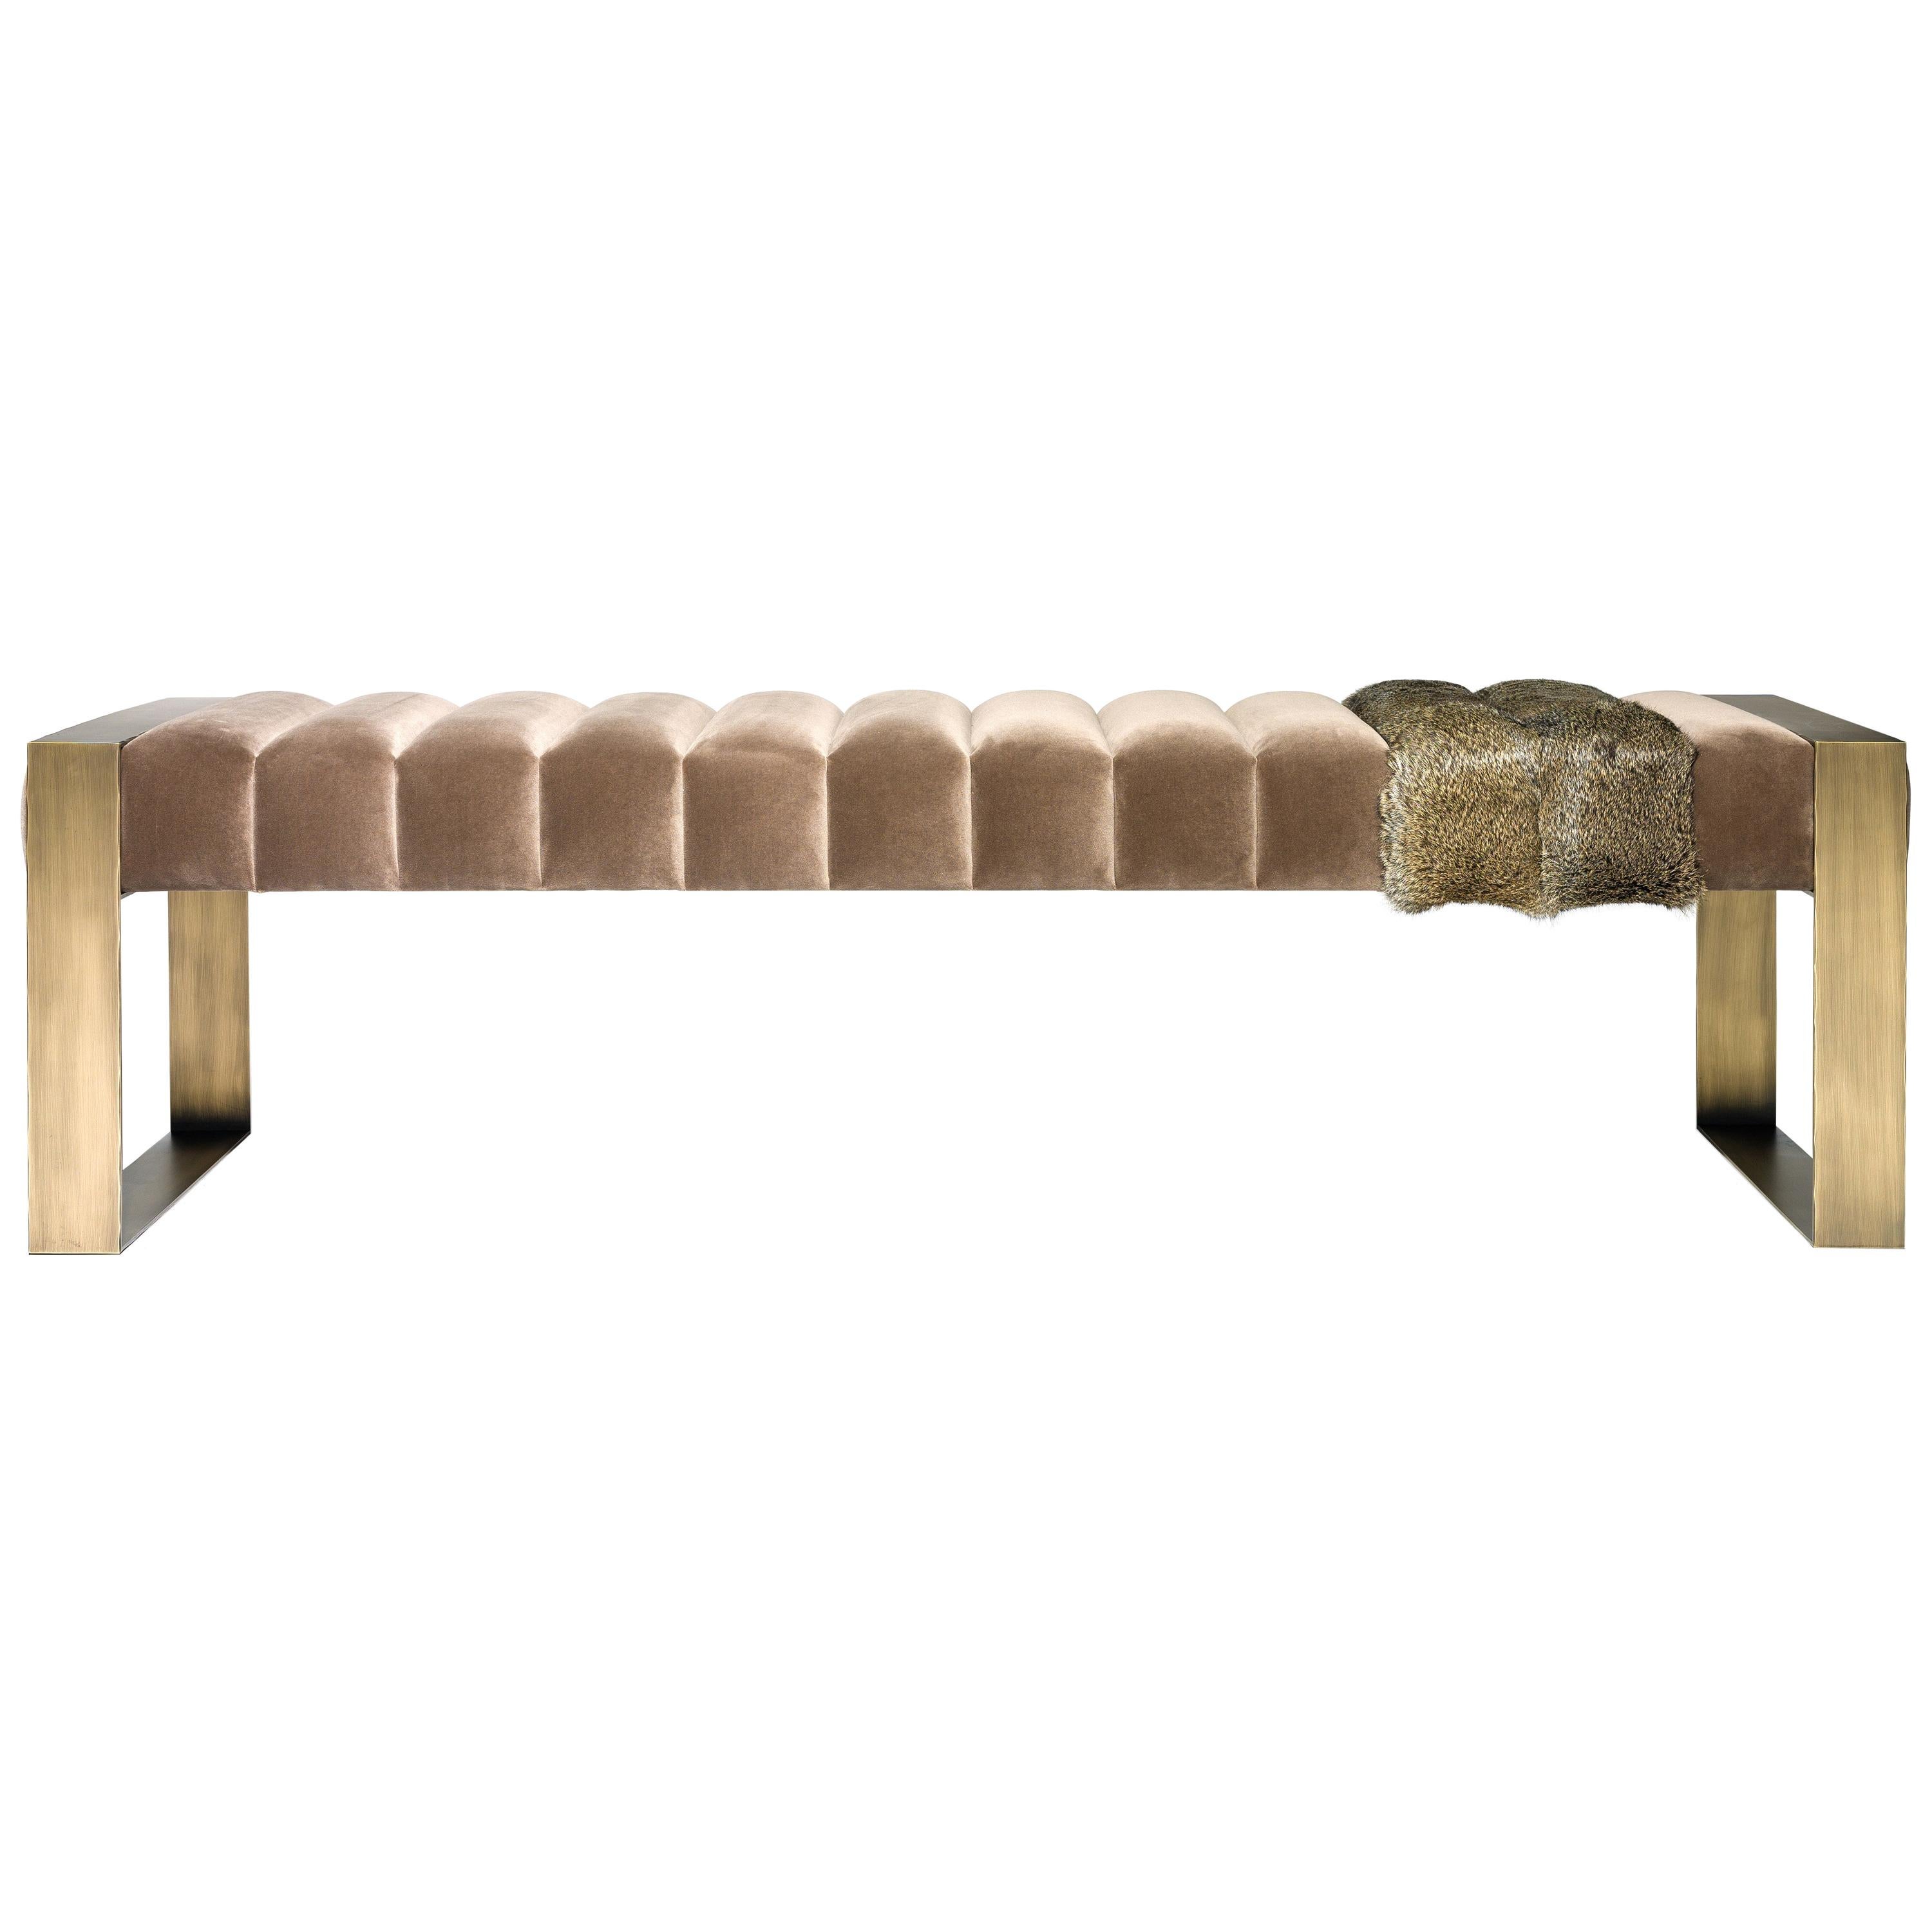 Contemporary bench is a statement design piece. This contemporary upholstered piece with an interesting twist of two fur strips. It evokes strength with the use of straight lines while the fur elements add a touch of luxury. This is an incredibly